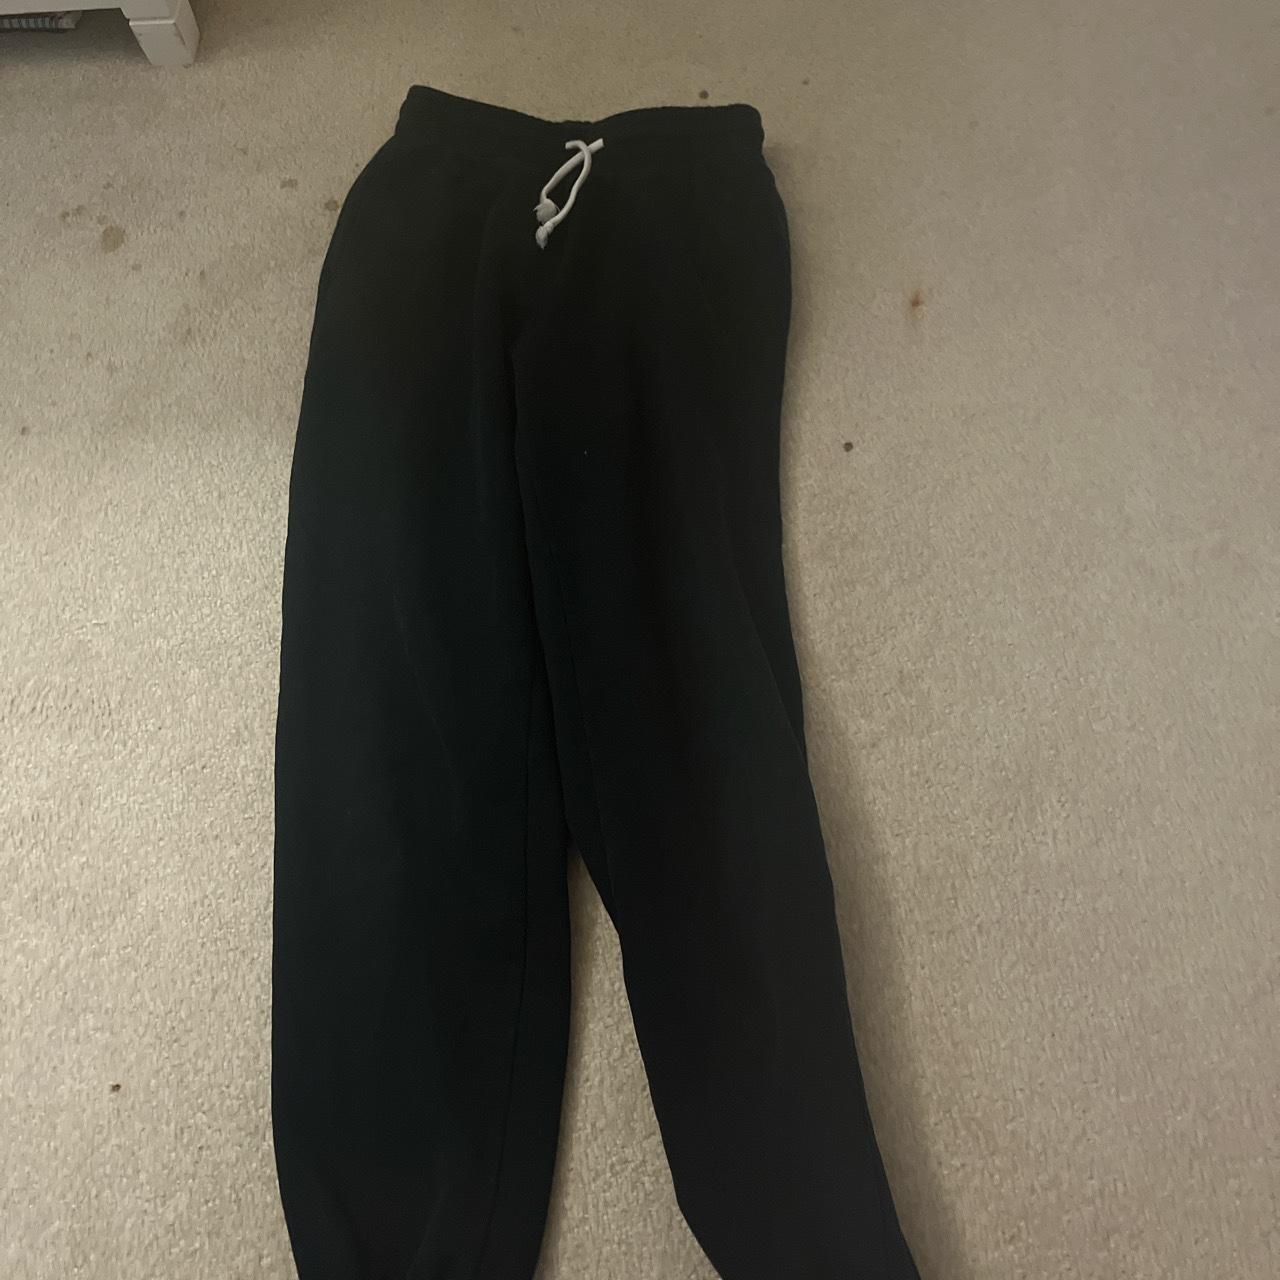 small black urban outfitters sweatpants - Depop